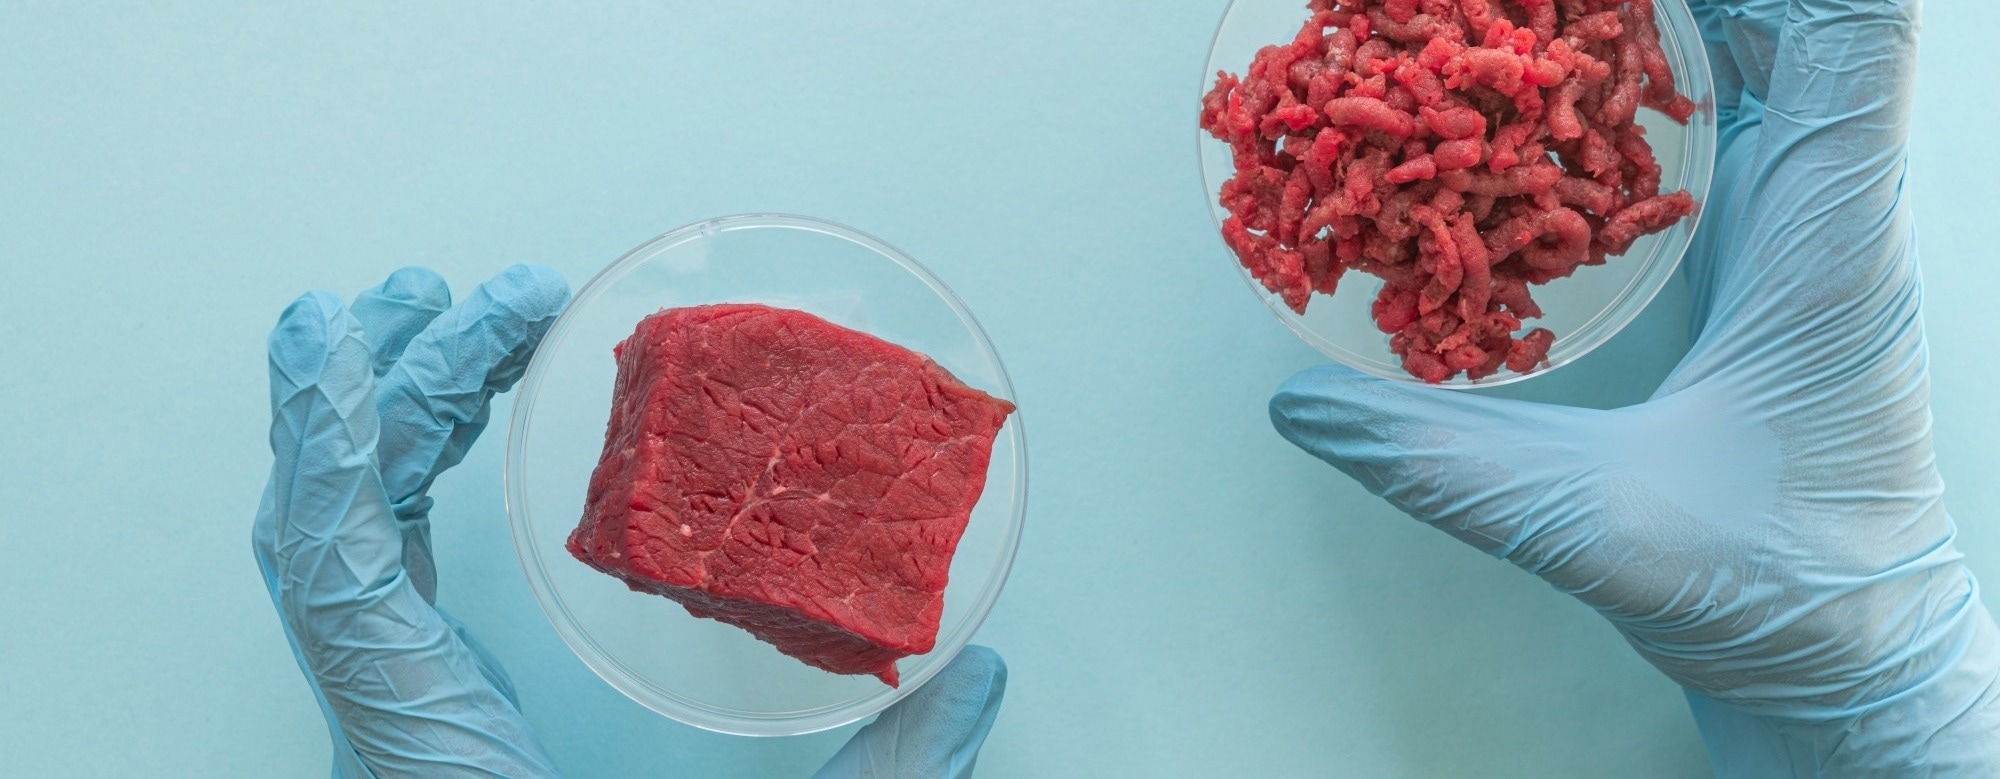 Consumers view plant-based meats as healthier, but are they ready to swap steaks for seitan?